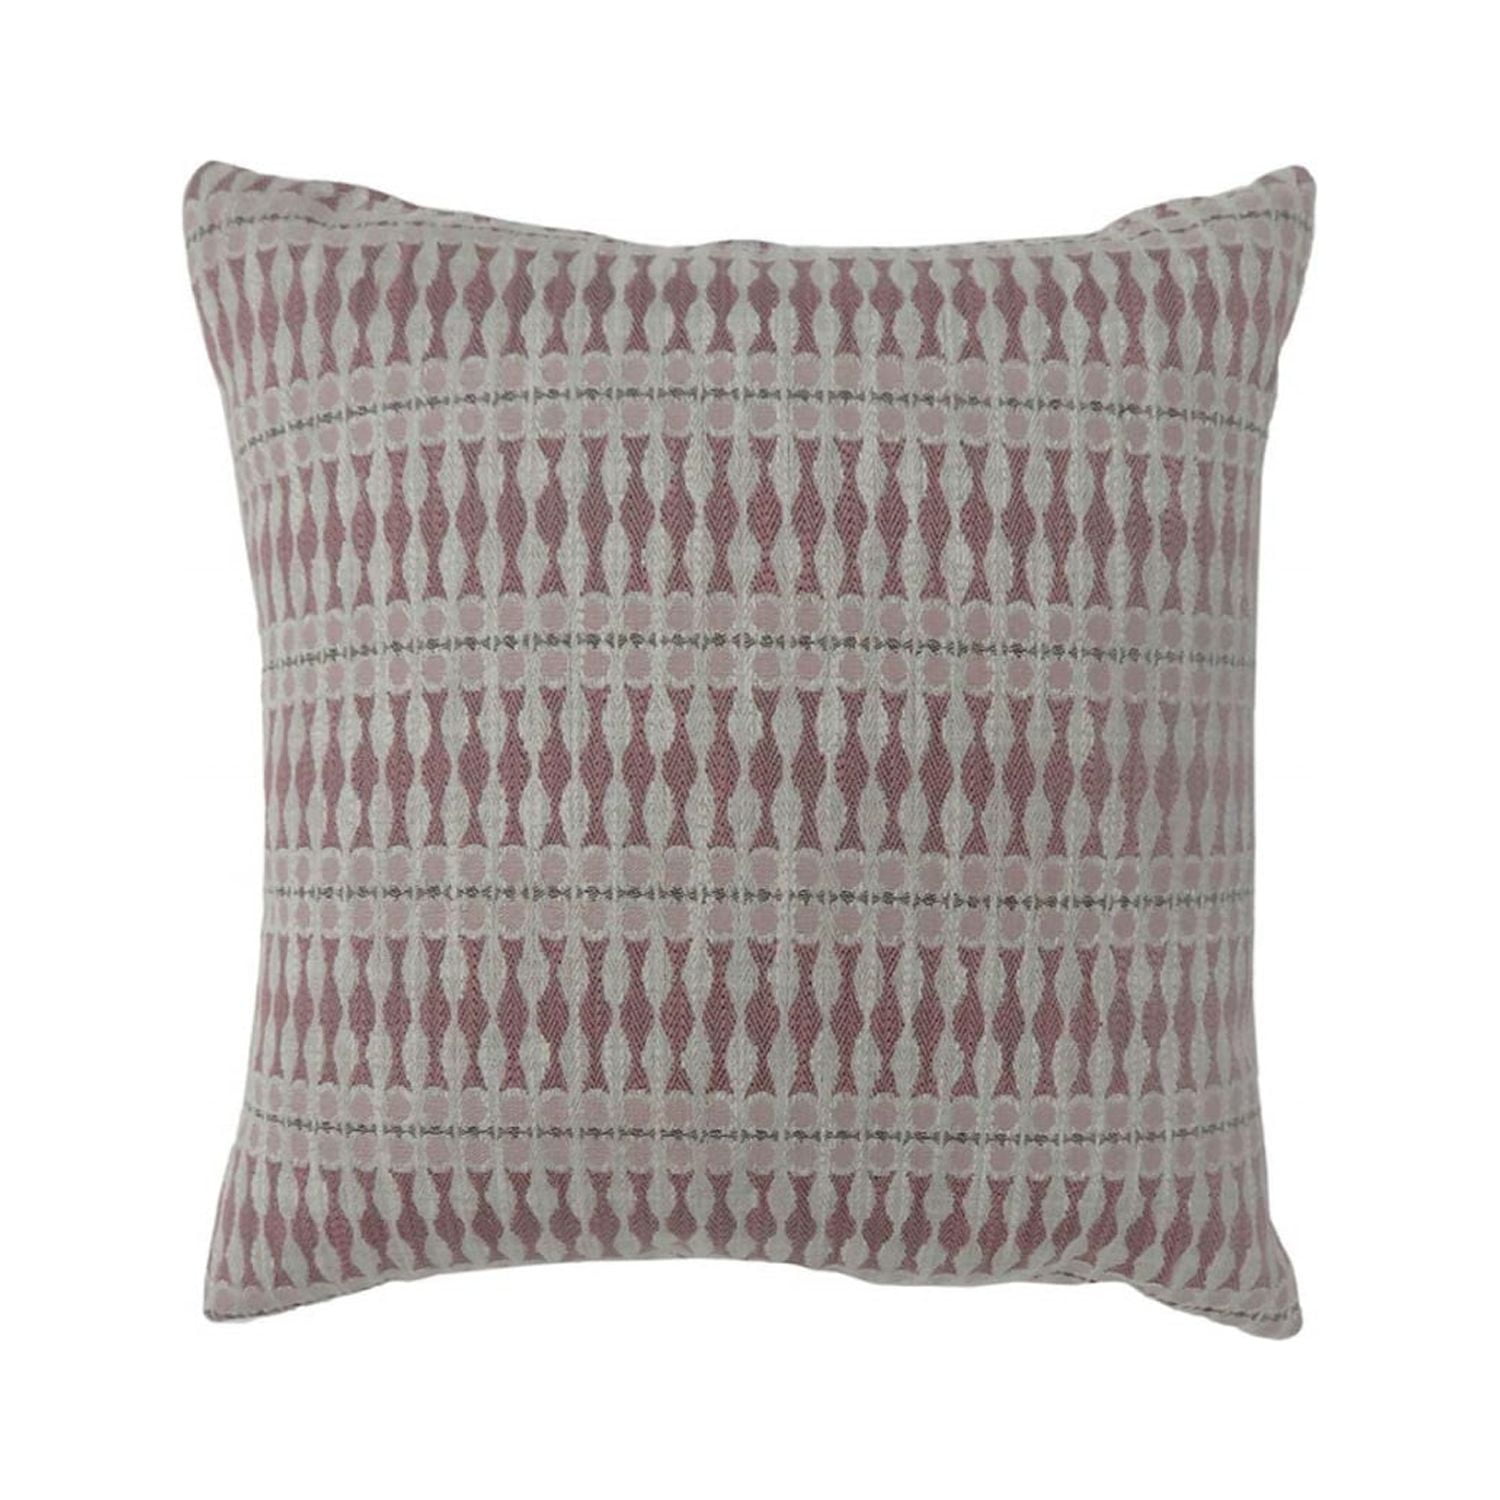 Picture of Benzara BM177979 Contemporary Style Simple Traditionally Designed Throw Pillows, Red - Set of 2 - 2 x 22 x 22 in.